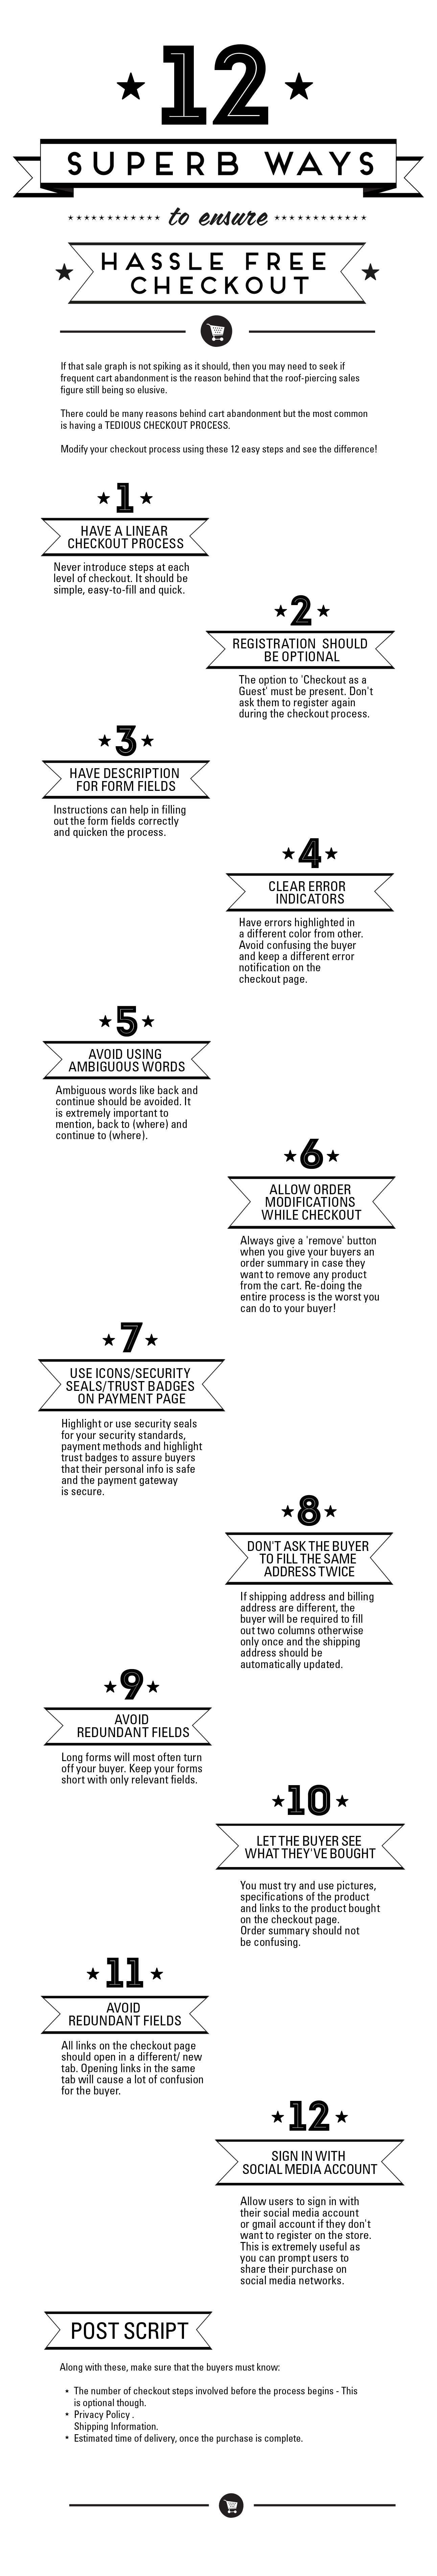 Hassle Free Checkout - 12 Ways to make checkout Easy - Infographic